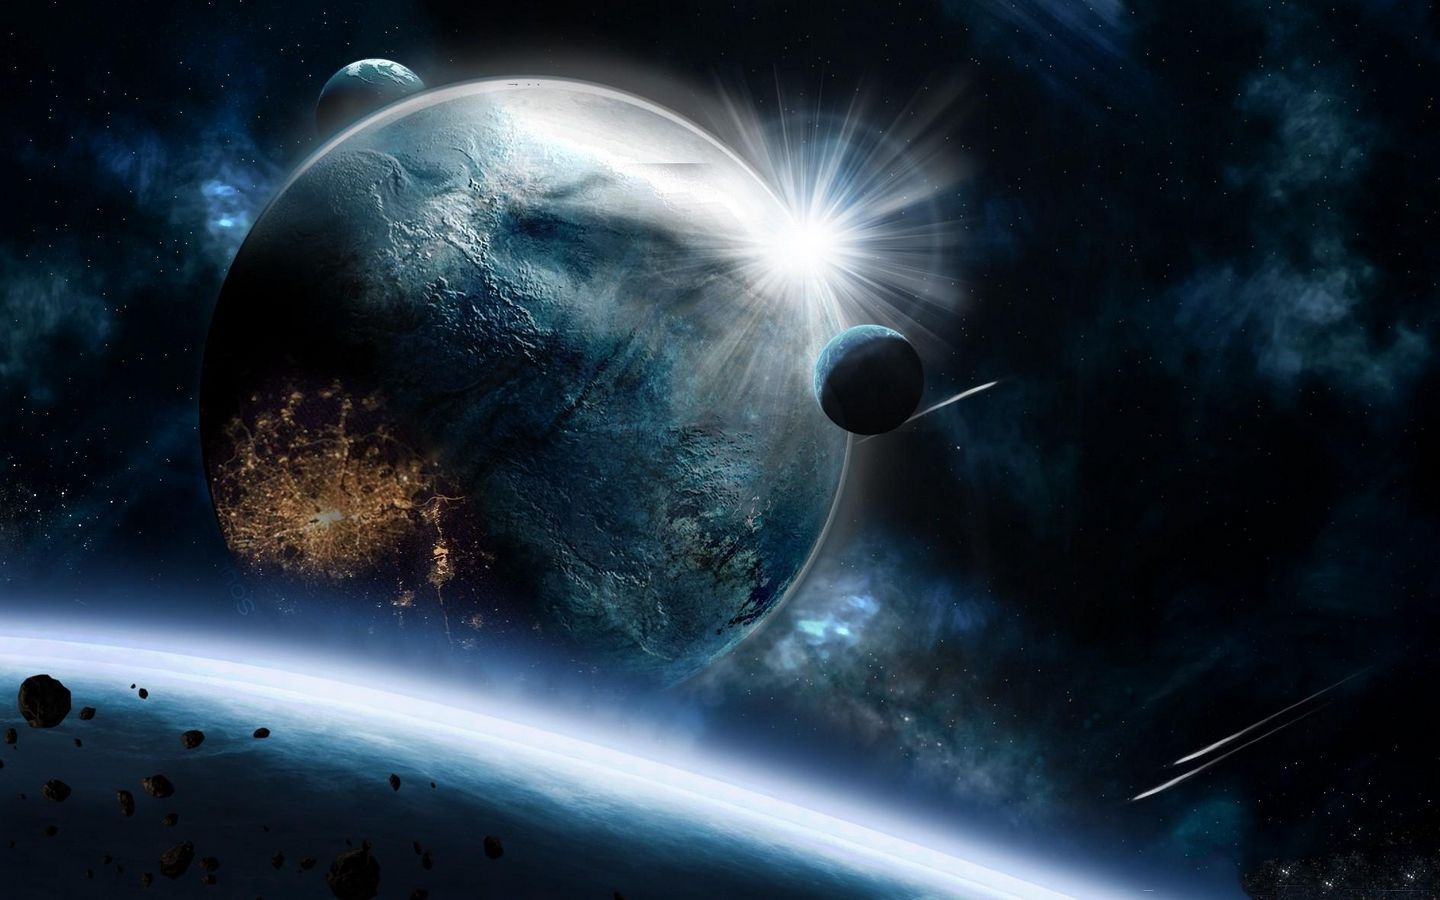 Download wallpaper 1440x900 planets, asteroids, speed, impact